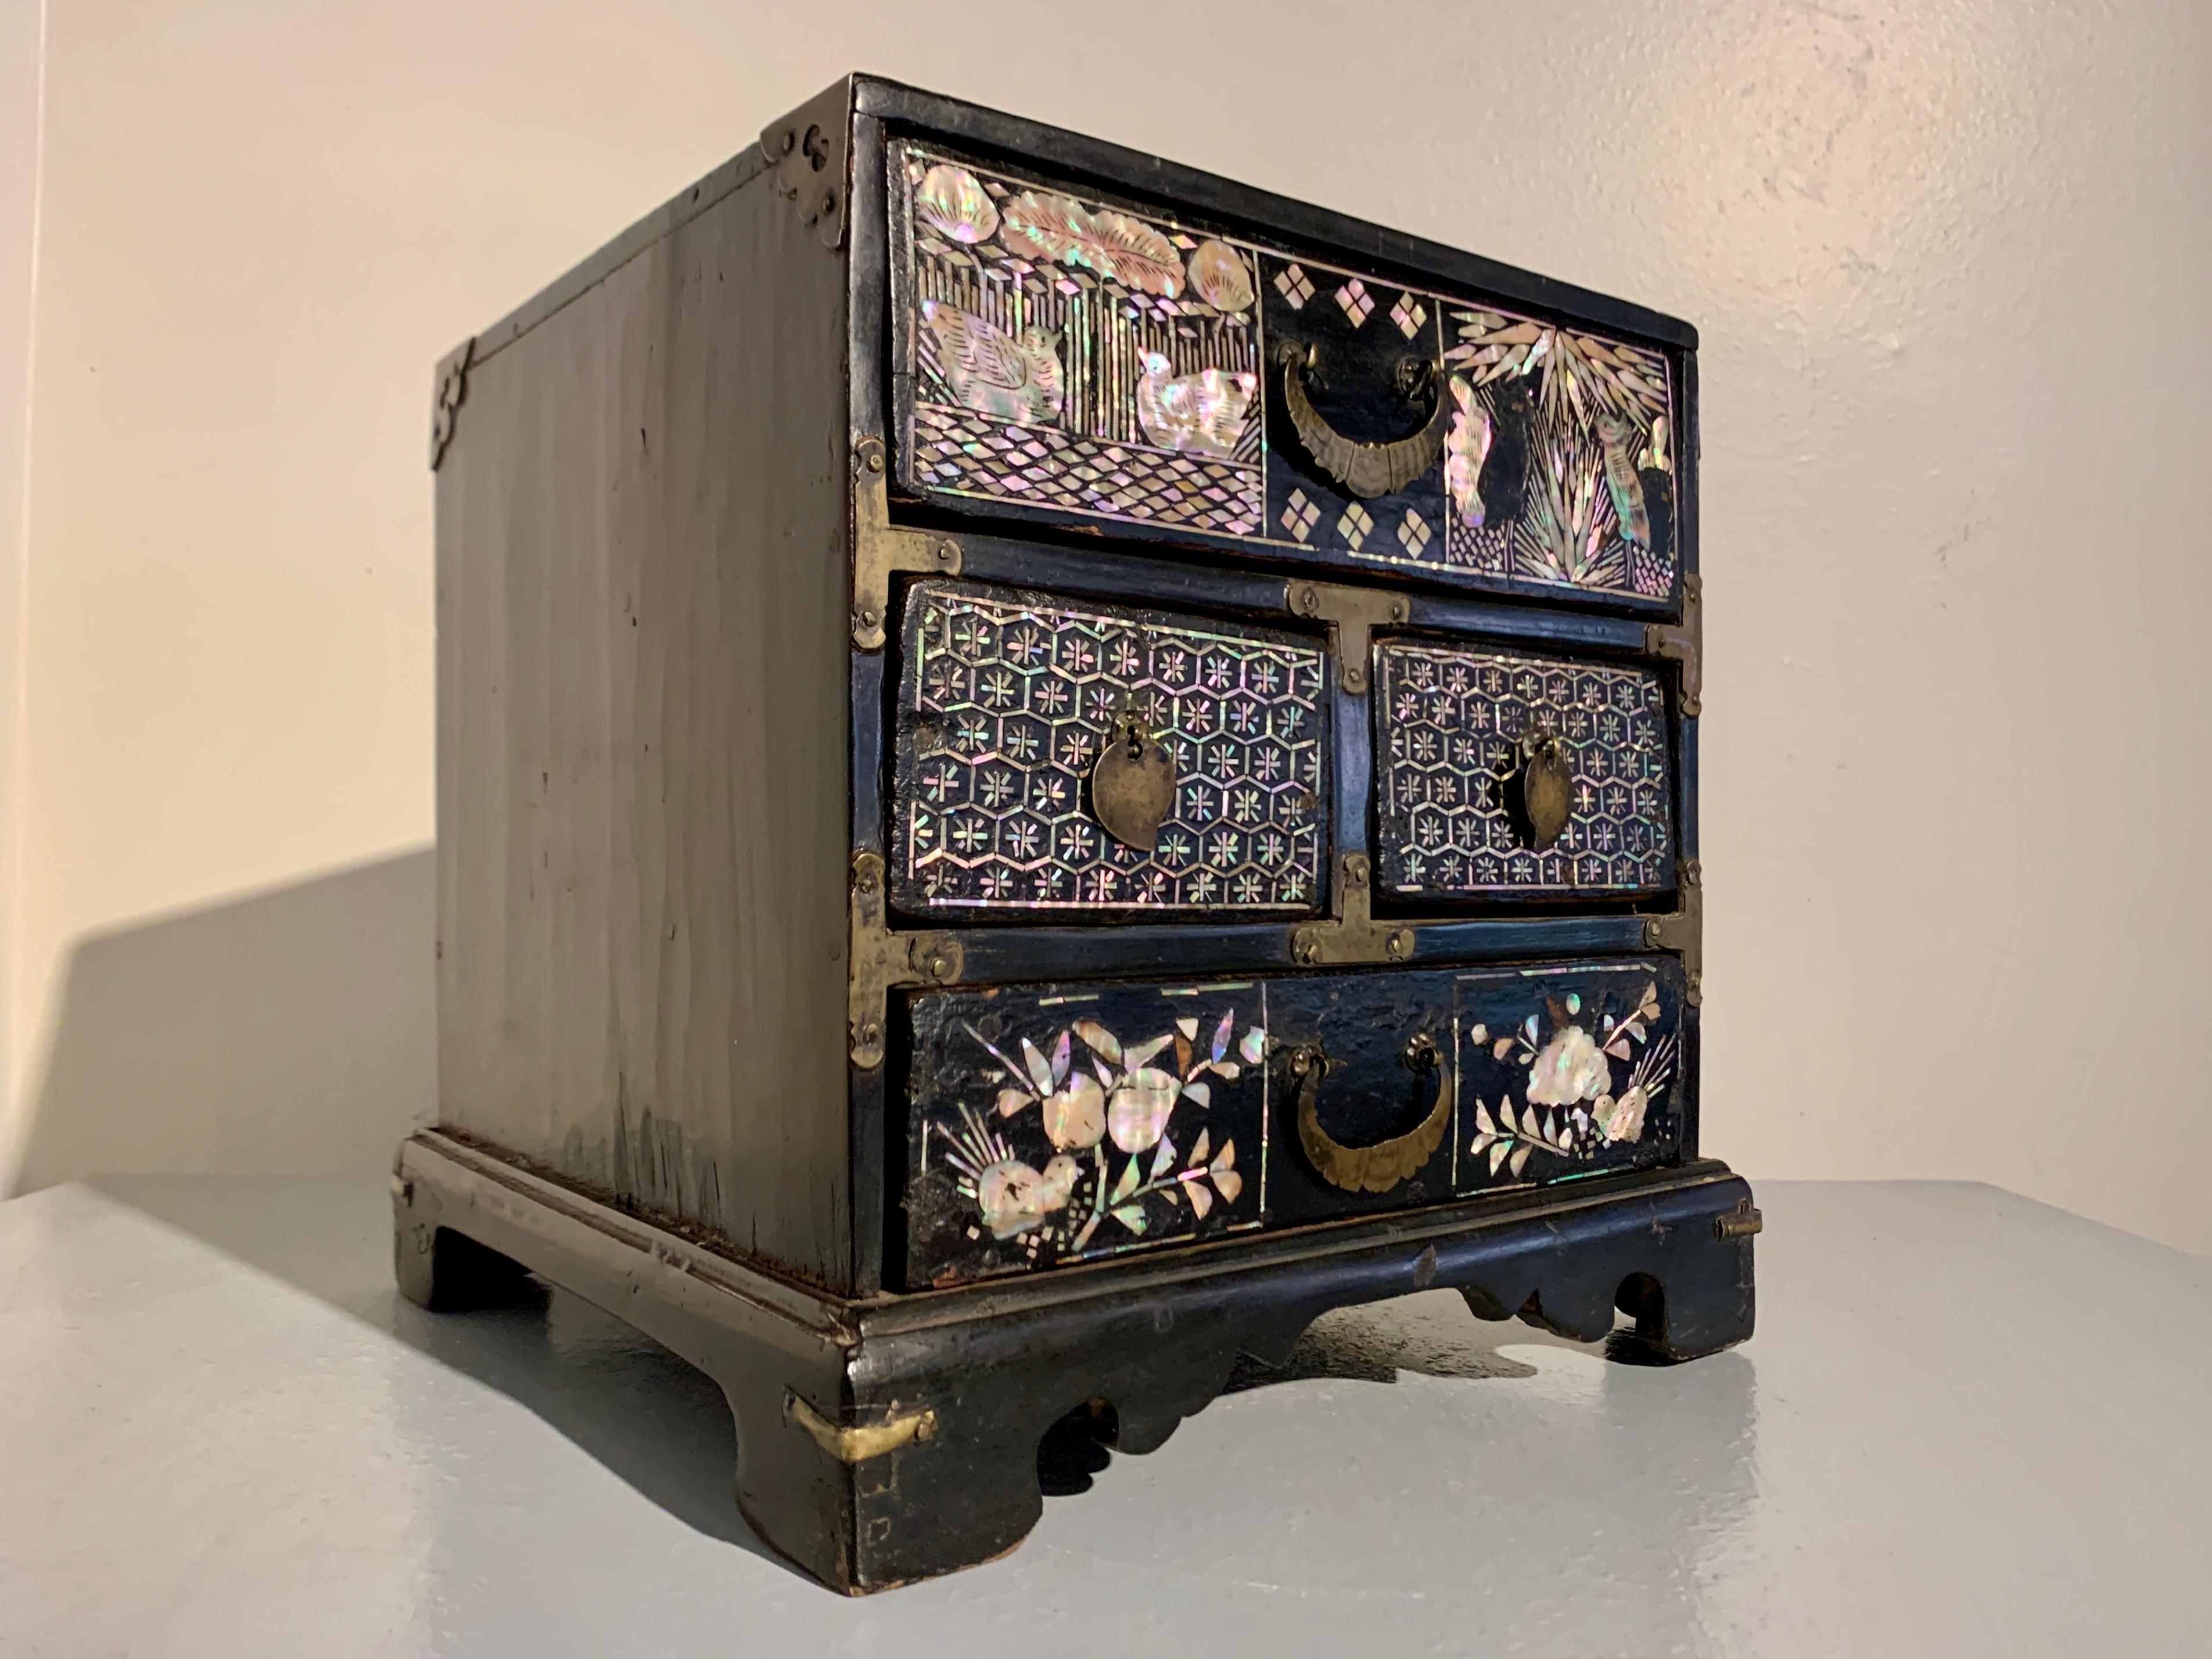 A charming Korean keyaki (Japanese elm), lacquer, and mother-of-pearl inlaid personal accessory chest for a woman, Joseon Dynasty, early 19th century or earlier, Korea.

The small accessory chest crafted from precious keyaki wood, lacquered and